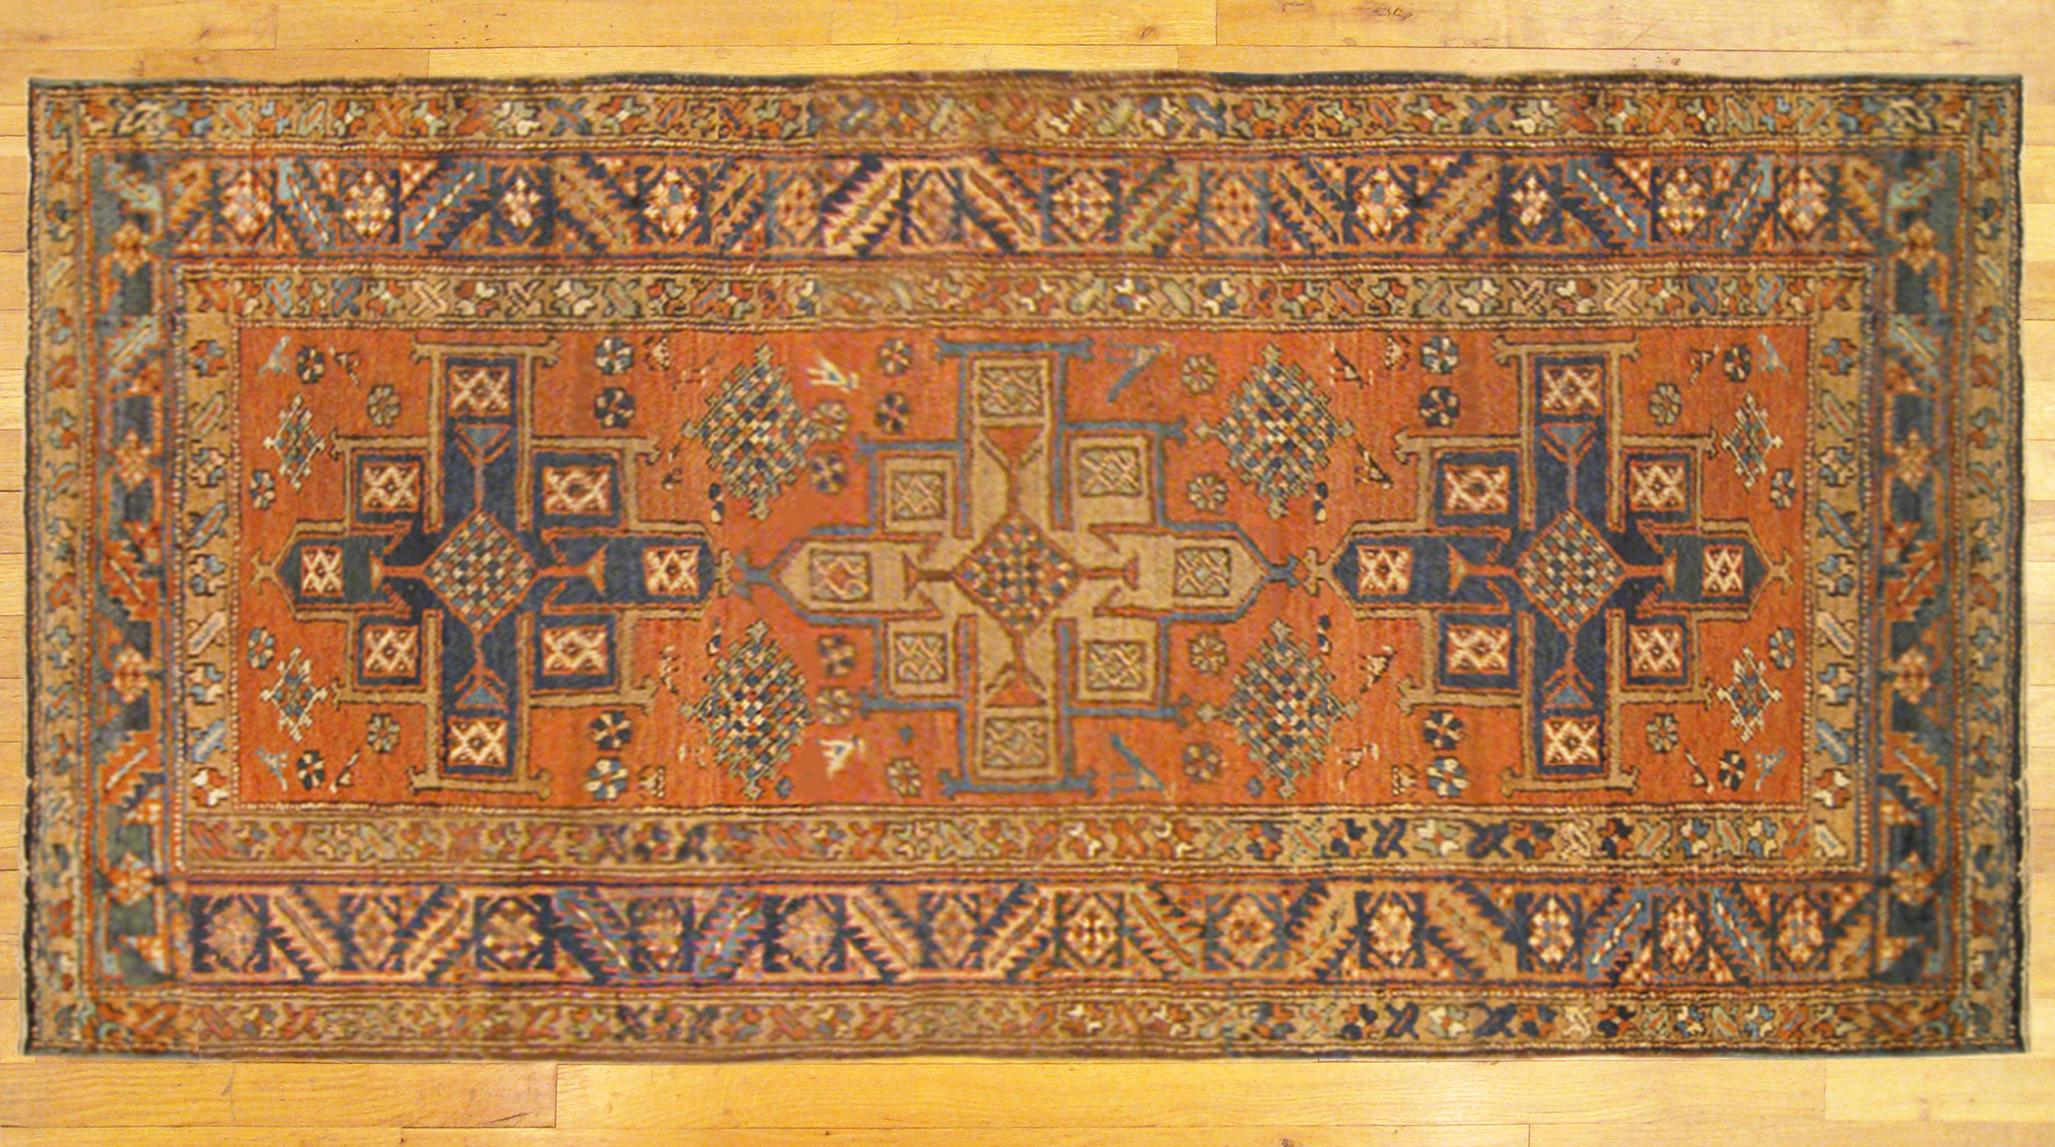 An antique Persian Heriz Karaja oriental rug, size 6'2 x 3'4, circa 1910. This handsome hand-woven geometric rug features multiple medallions in the rust-red primary field. The central field is enclosed within a blue outer border with motifs of